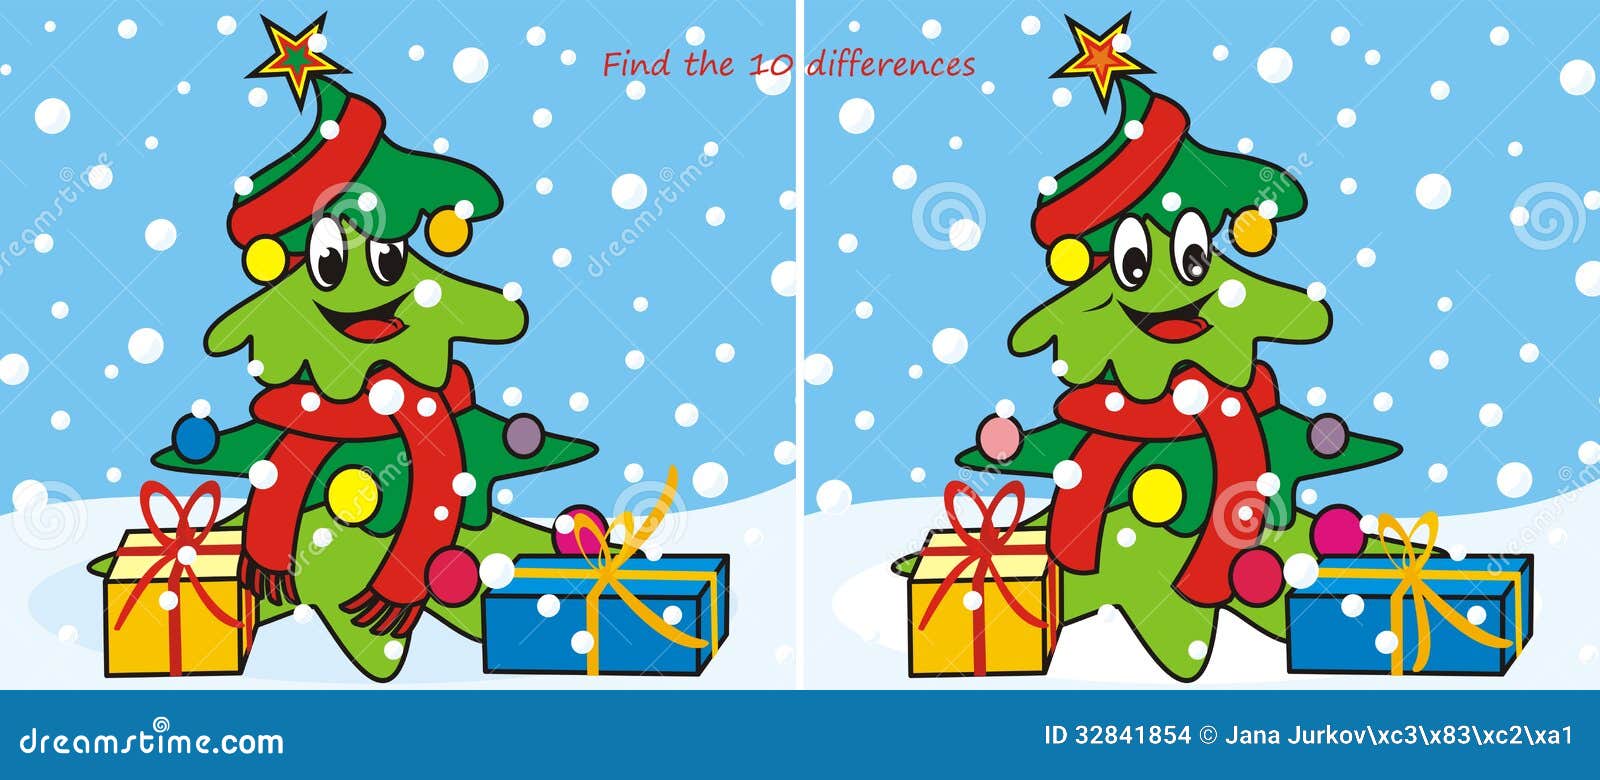 Christmas Treescarf 10 Differences Stock Images Image